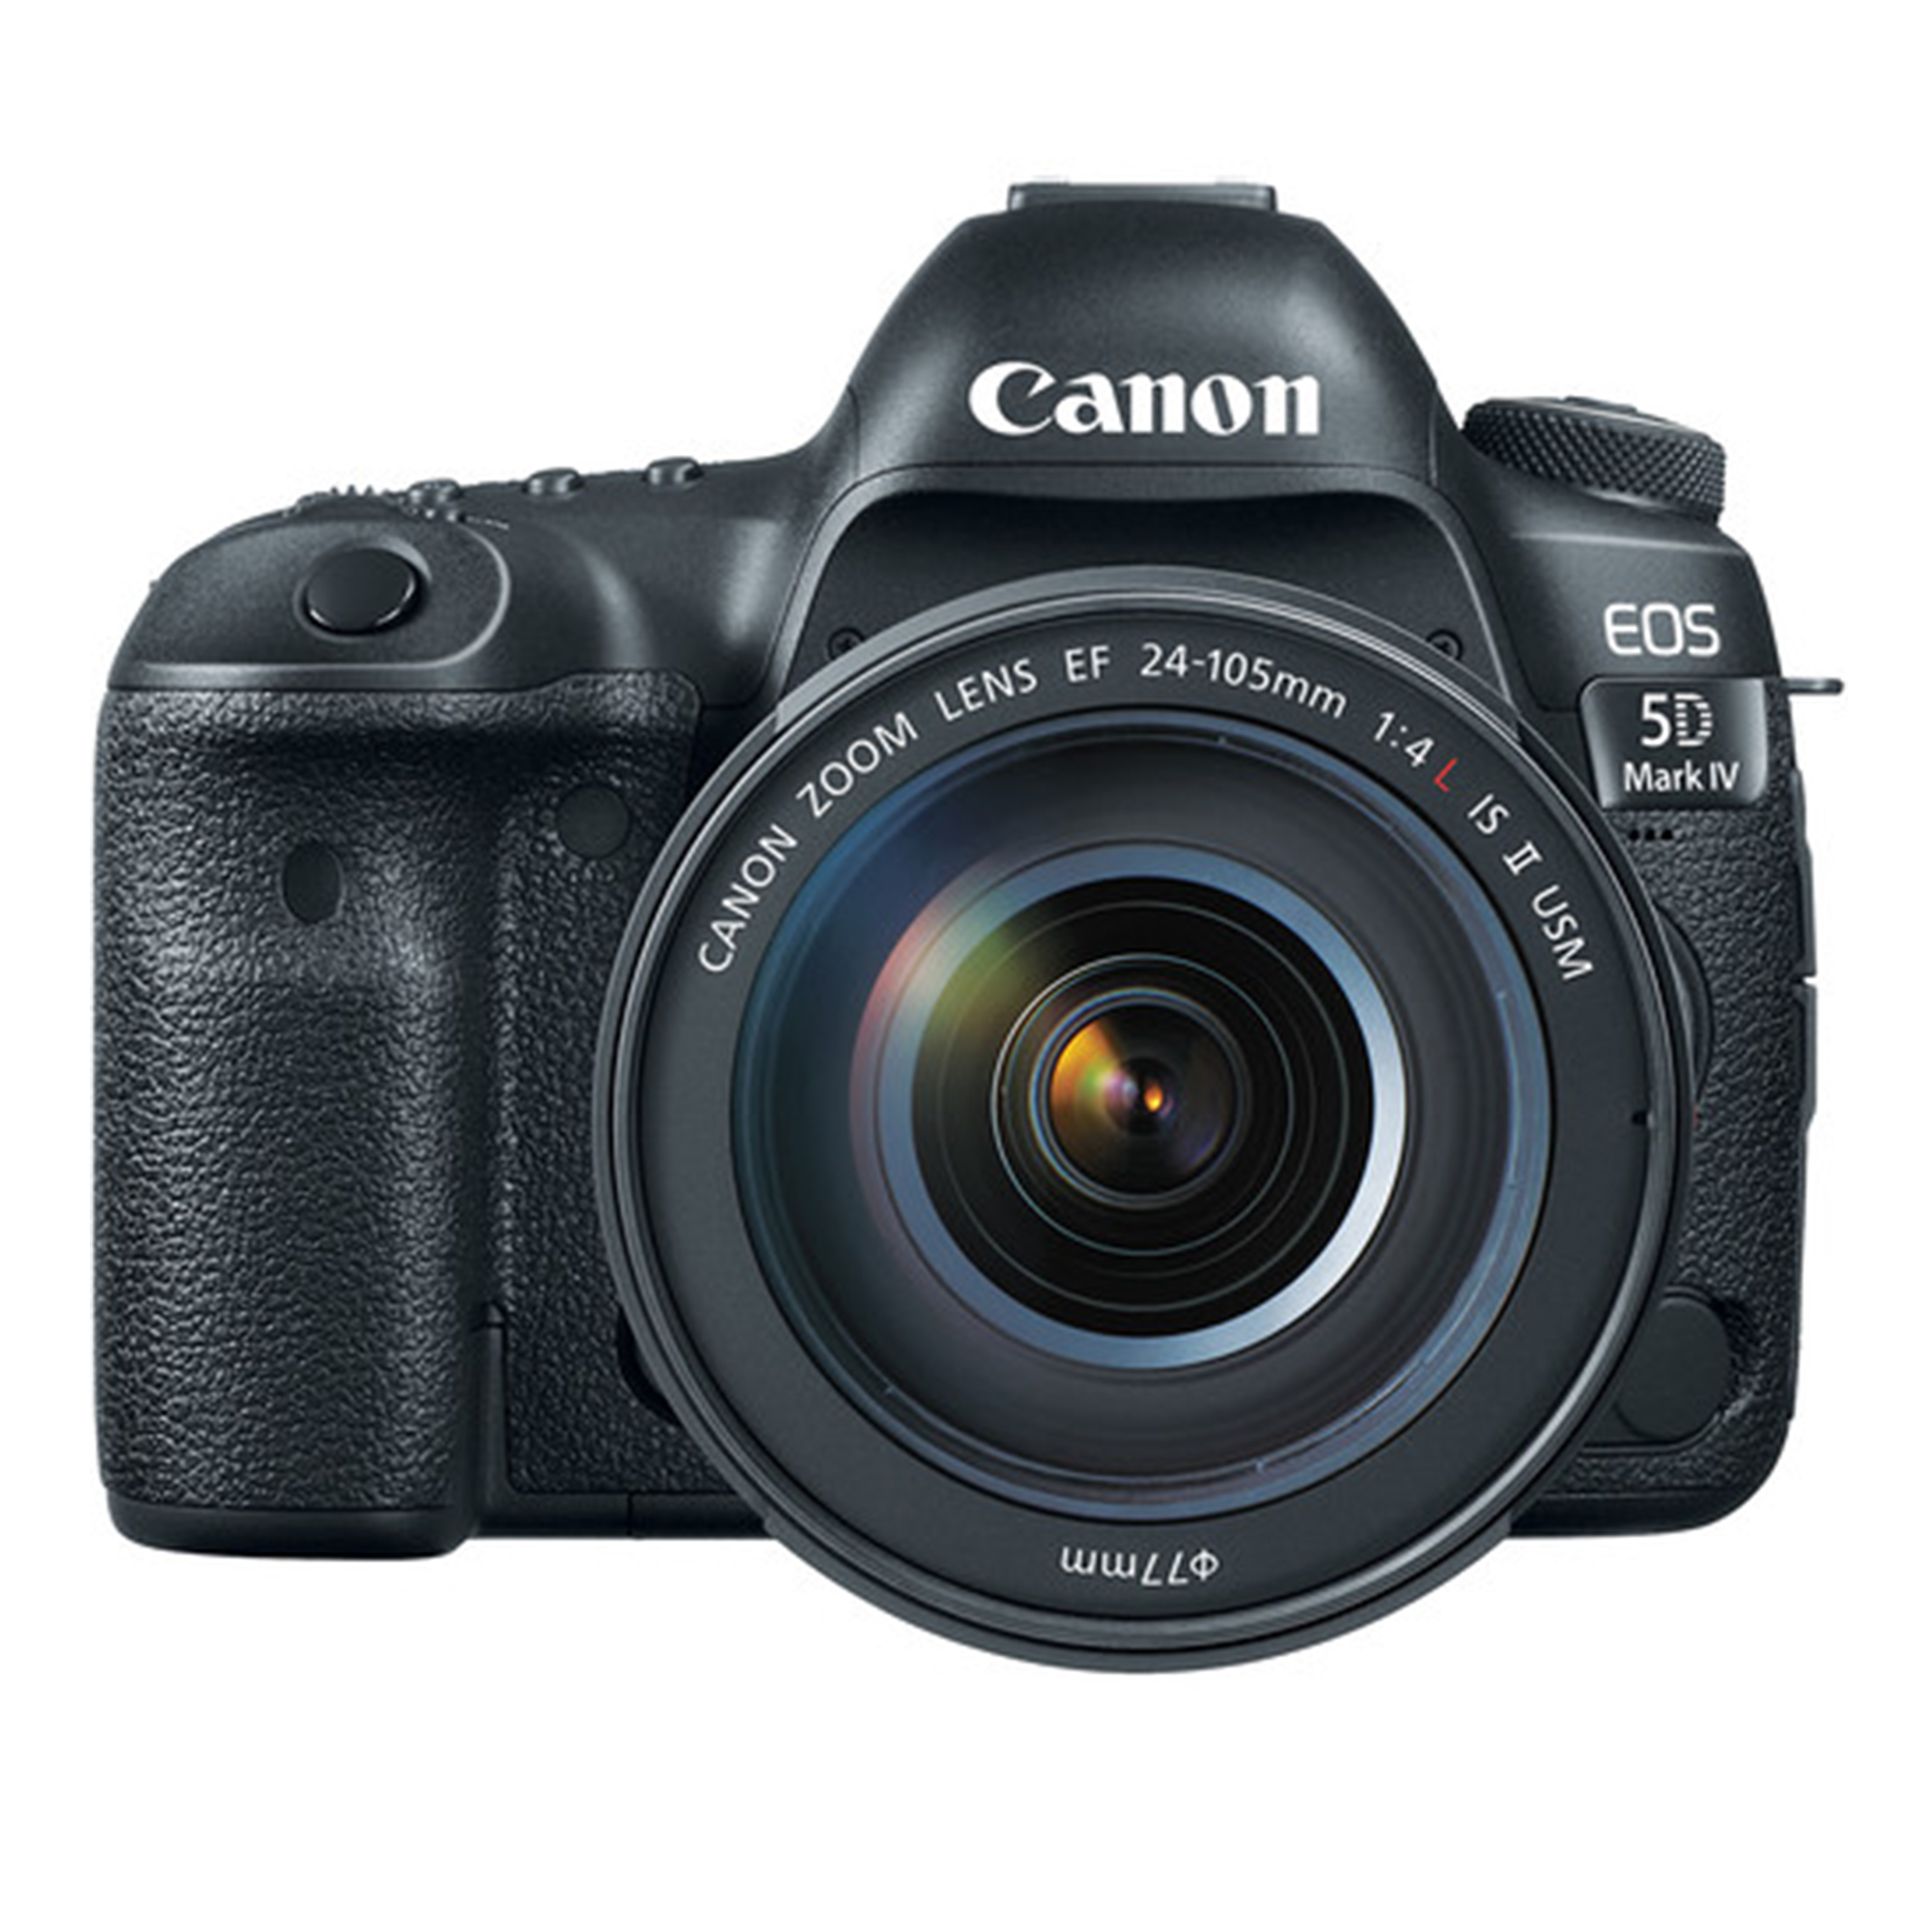 CANON EOS 5D MARK IV WITH EF 24-105 MM Lens